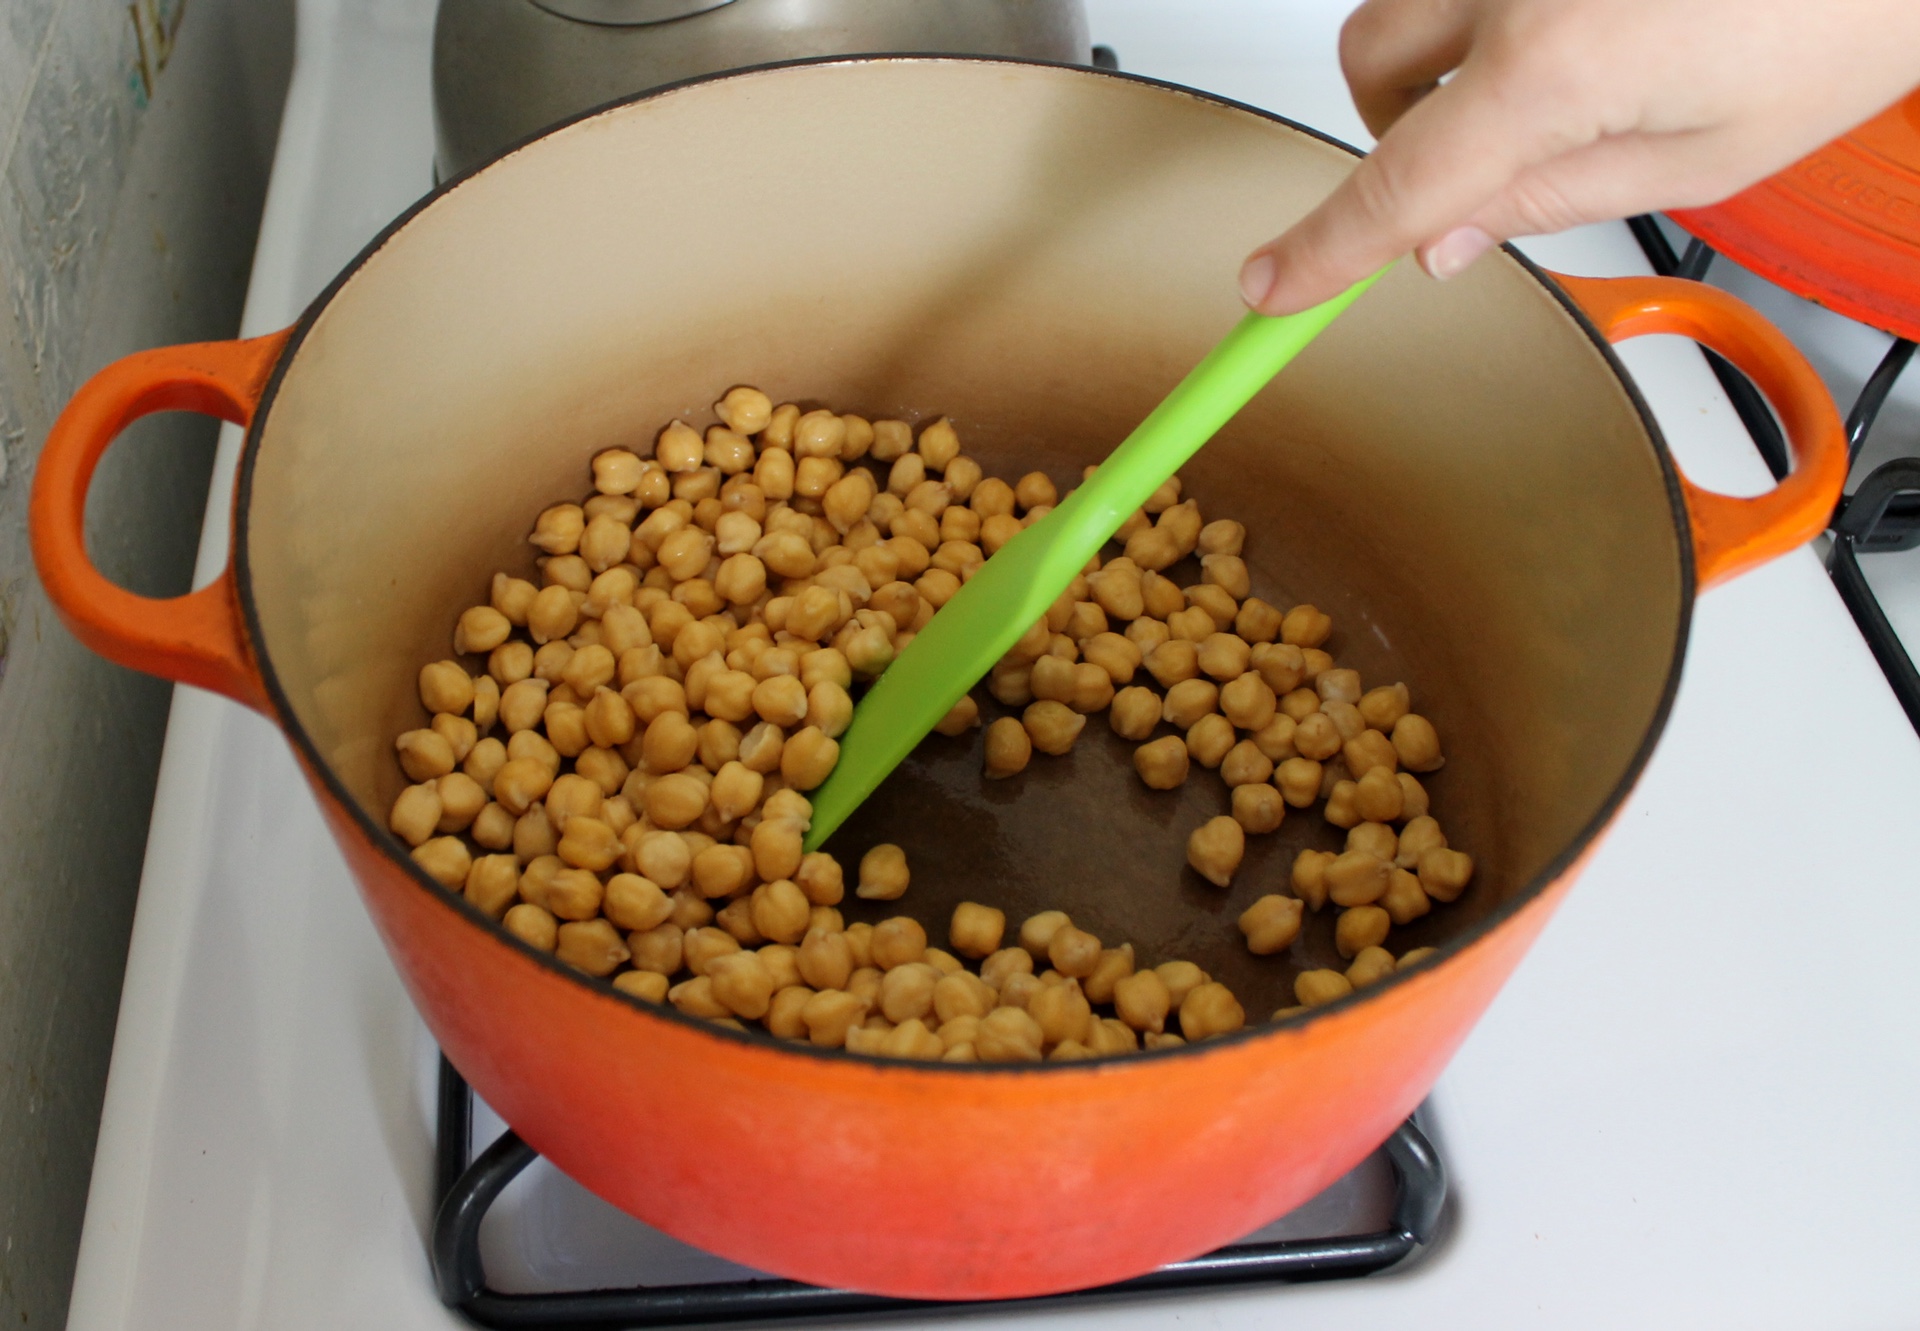 Cooking the chickpeas dry with a little baking soda speeds up cooking and helps remove pesky chickpea skins.